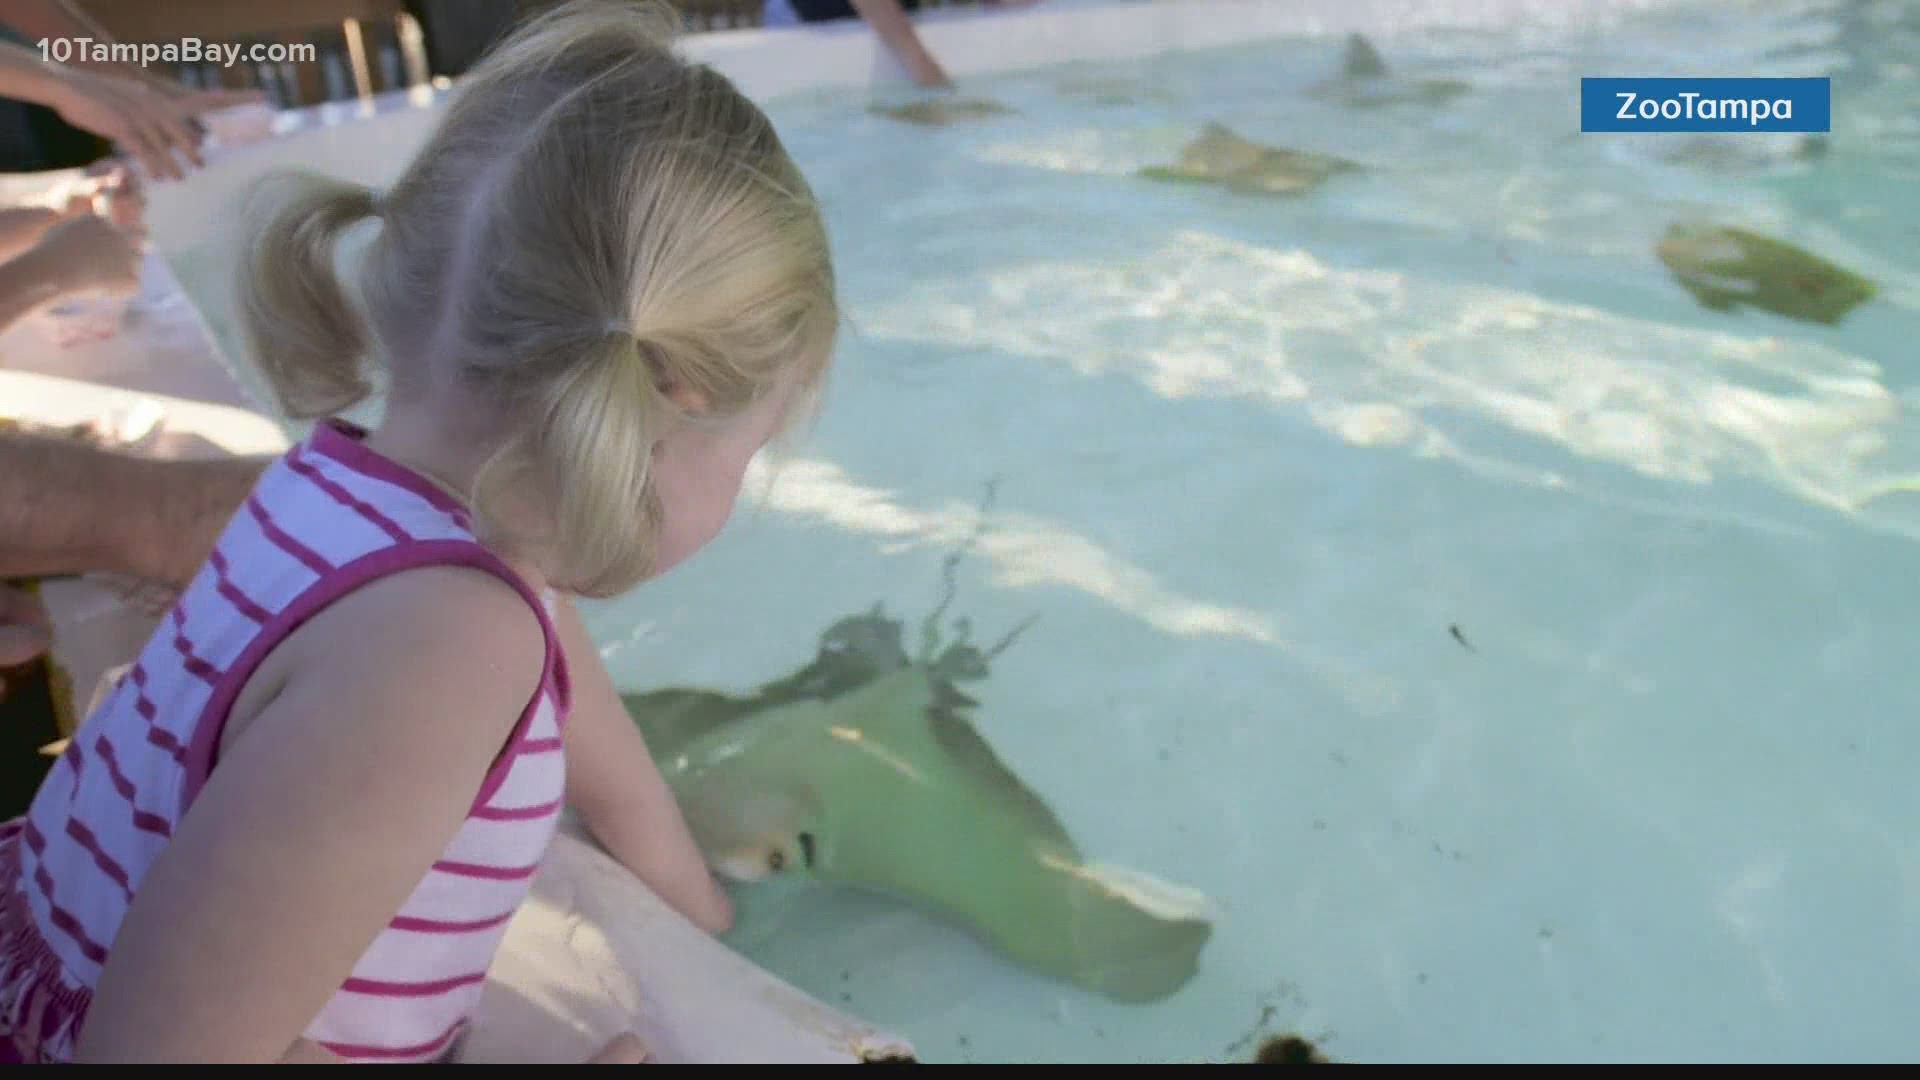 The current Stingray Bay habitat will not reopen. A new habitat will be developed.